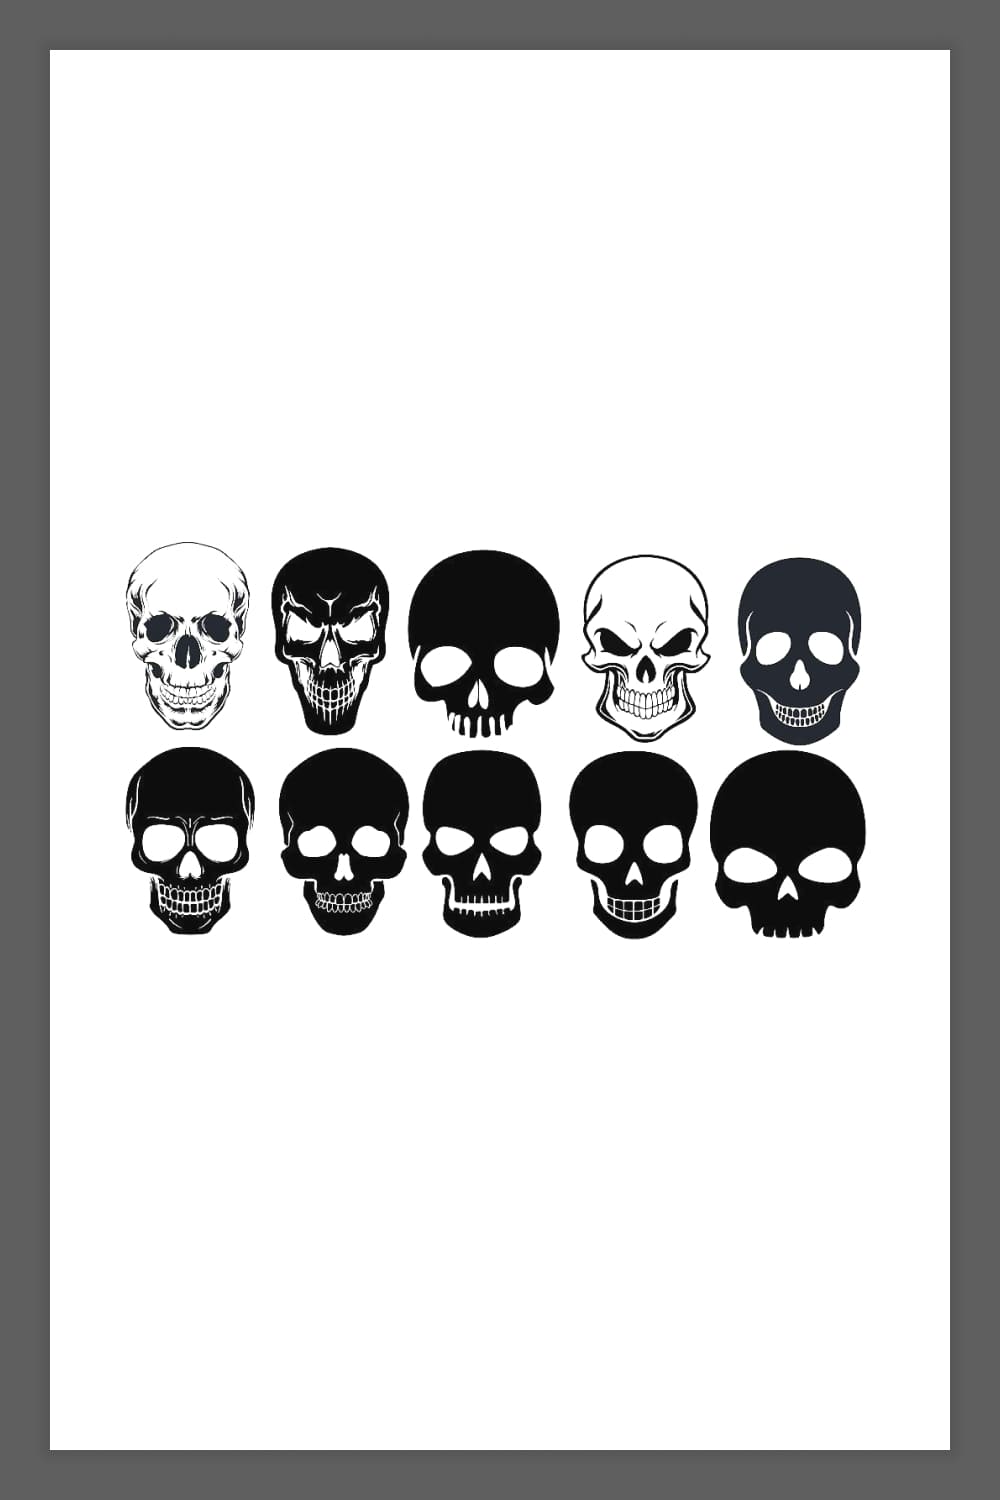 Collage of ten images of skulls with different details.